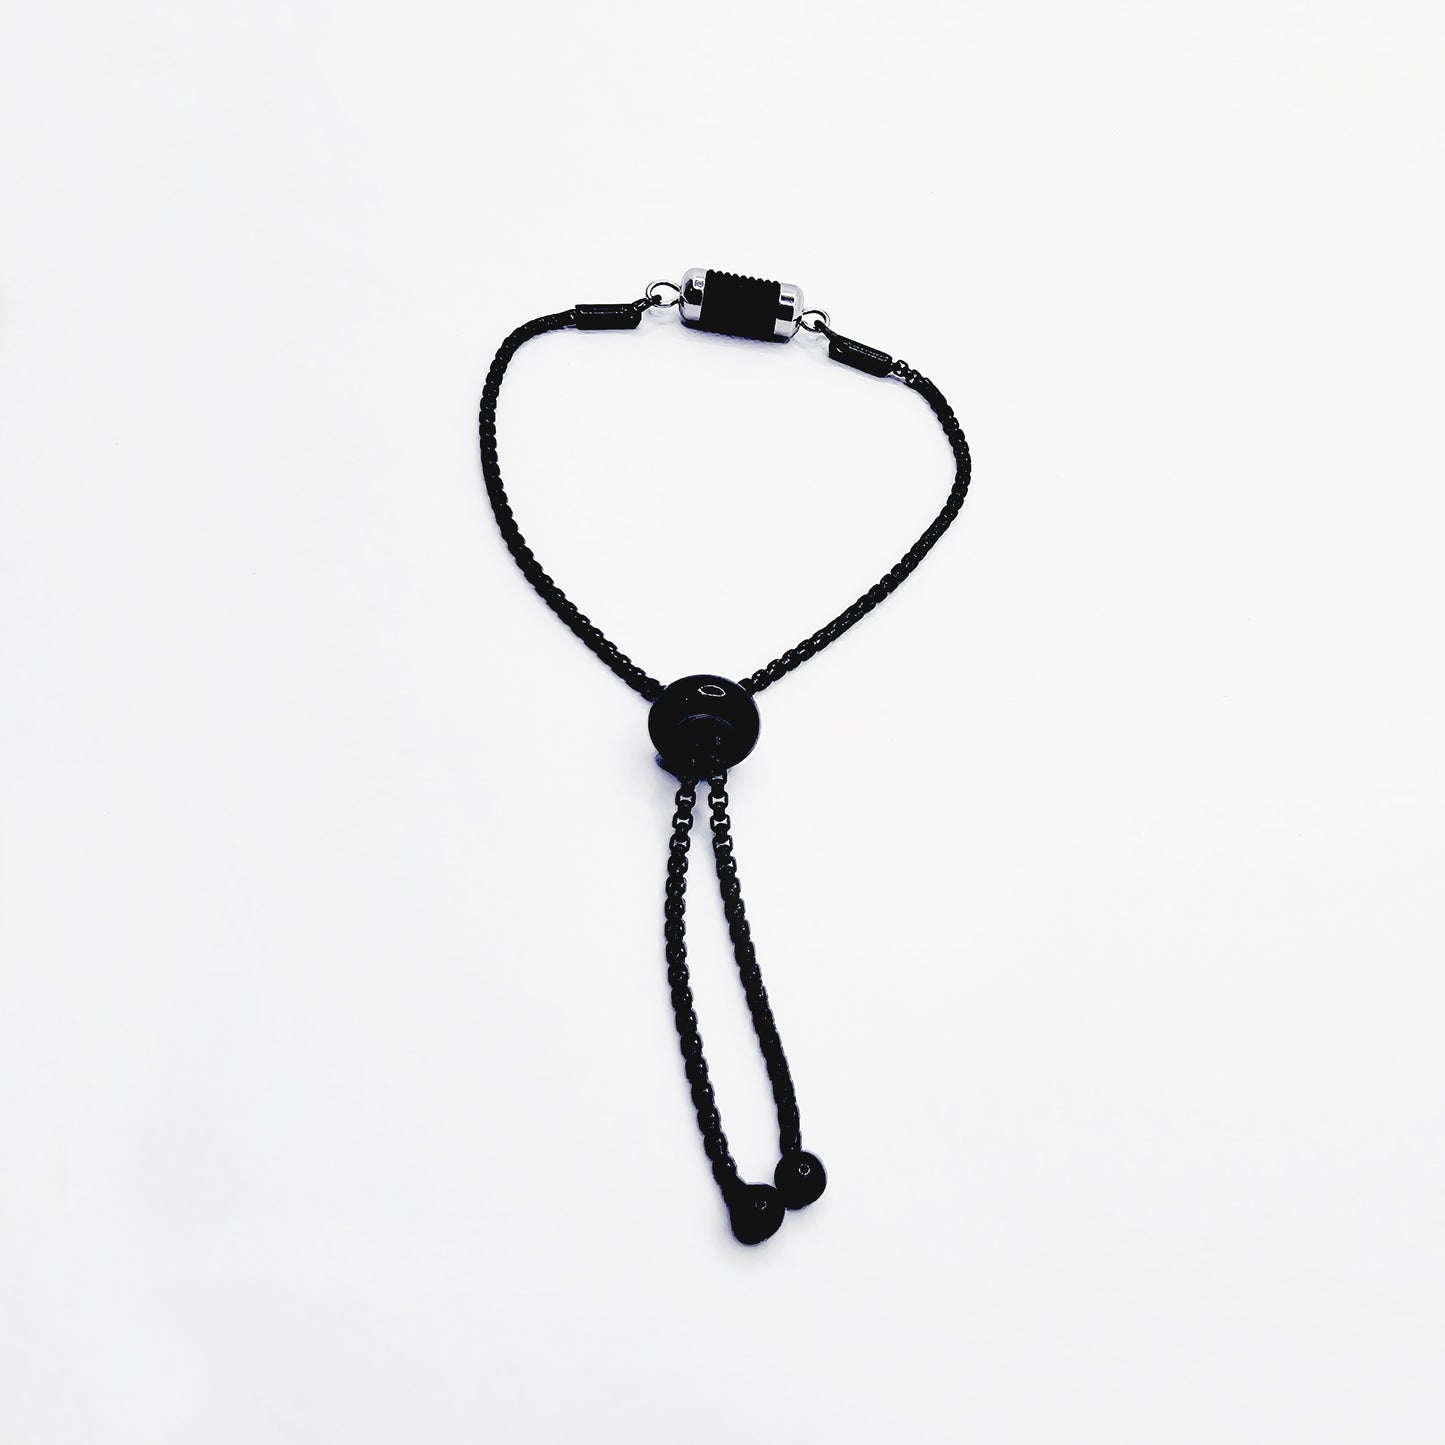 Penis Chain Noose Bracelet. Black Stainless Steel Adjustable Bolo Style Cock Ring with Stimulating Barrel Roller